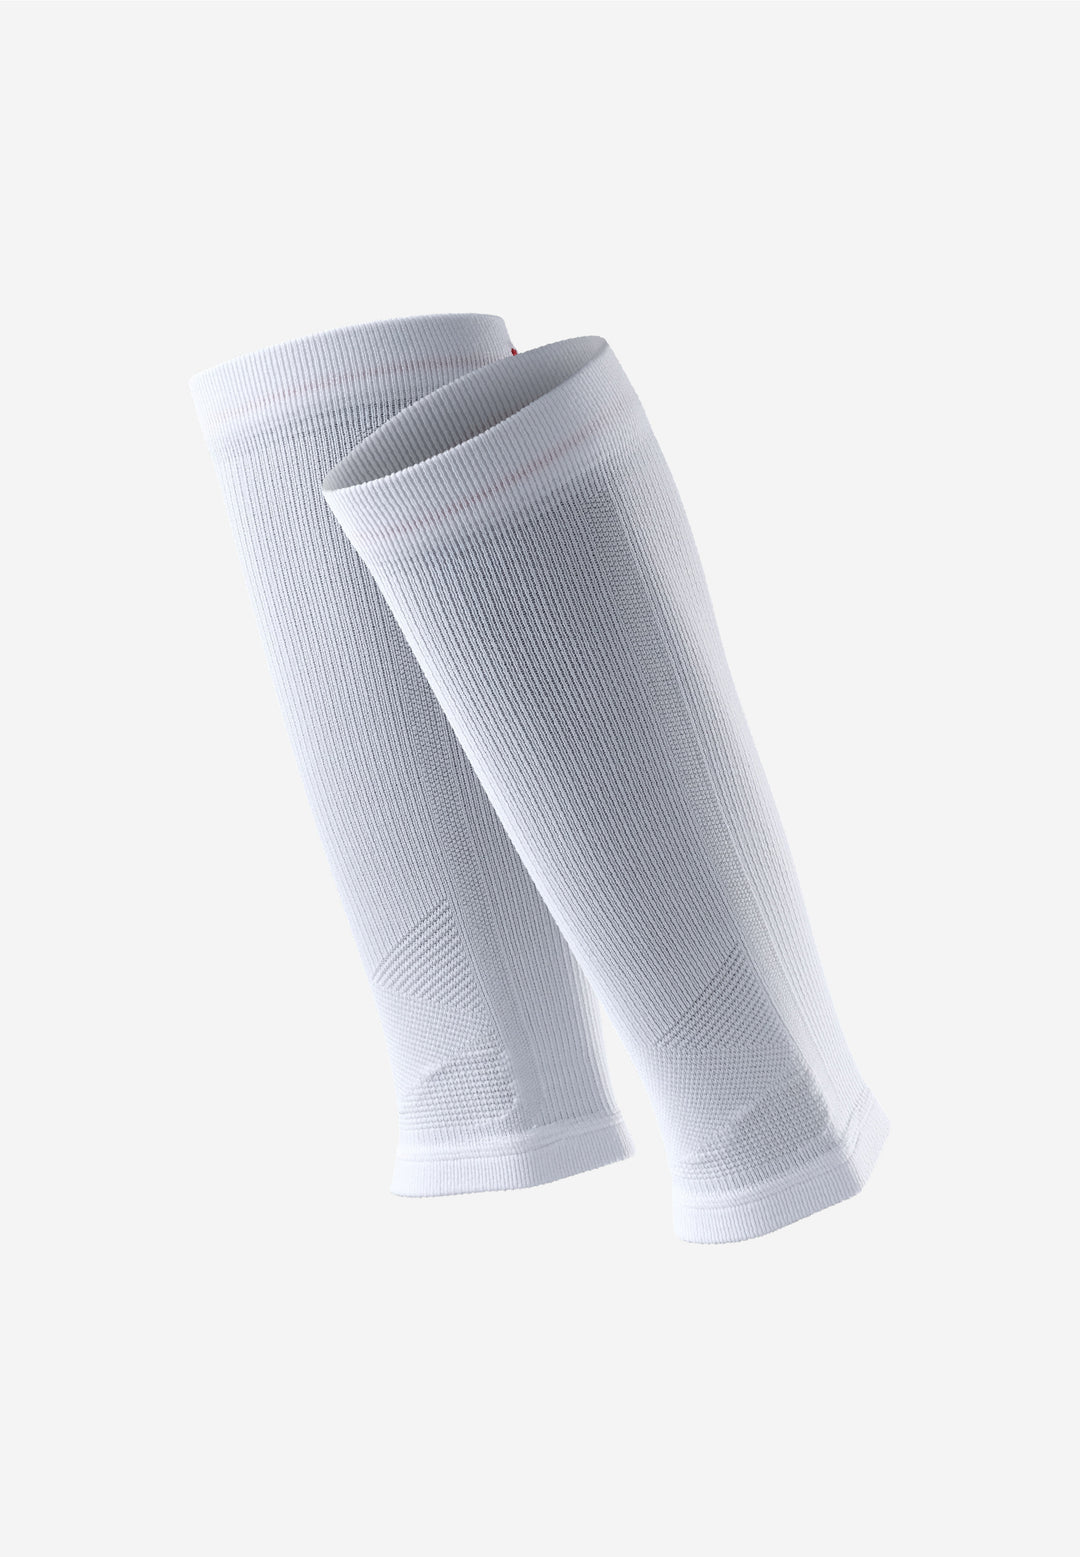 CALF COMPRESSION SLEEVES